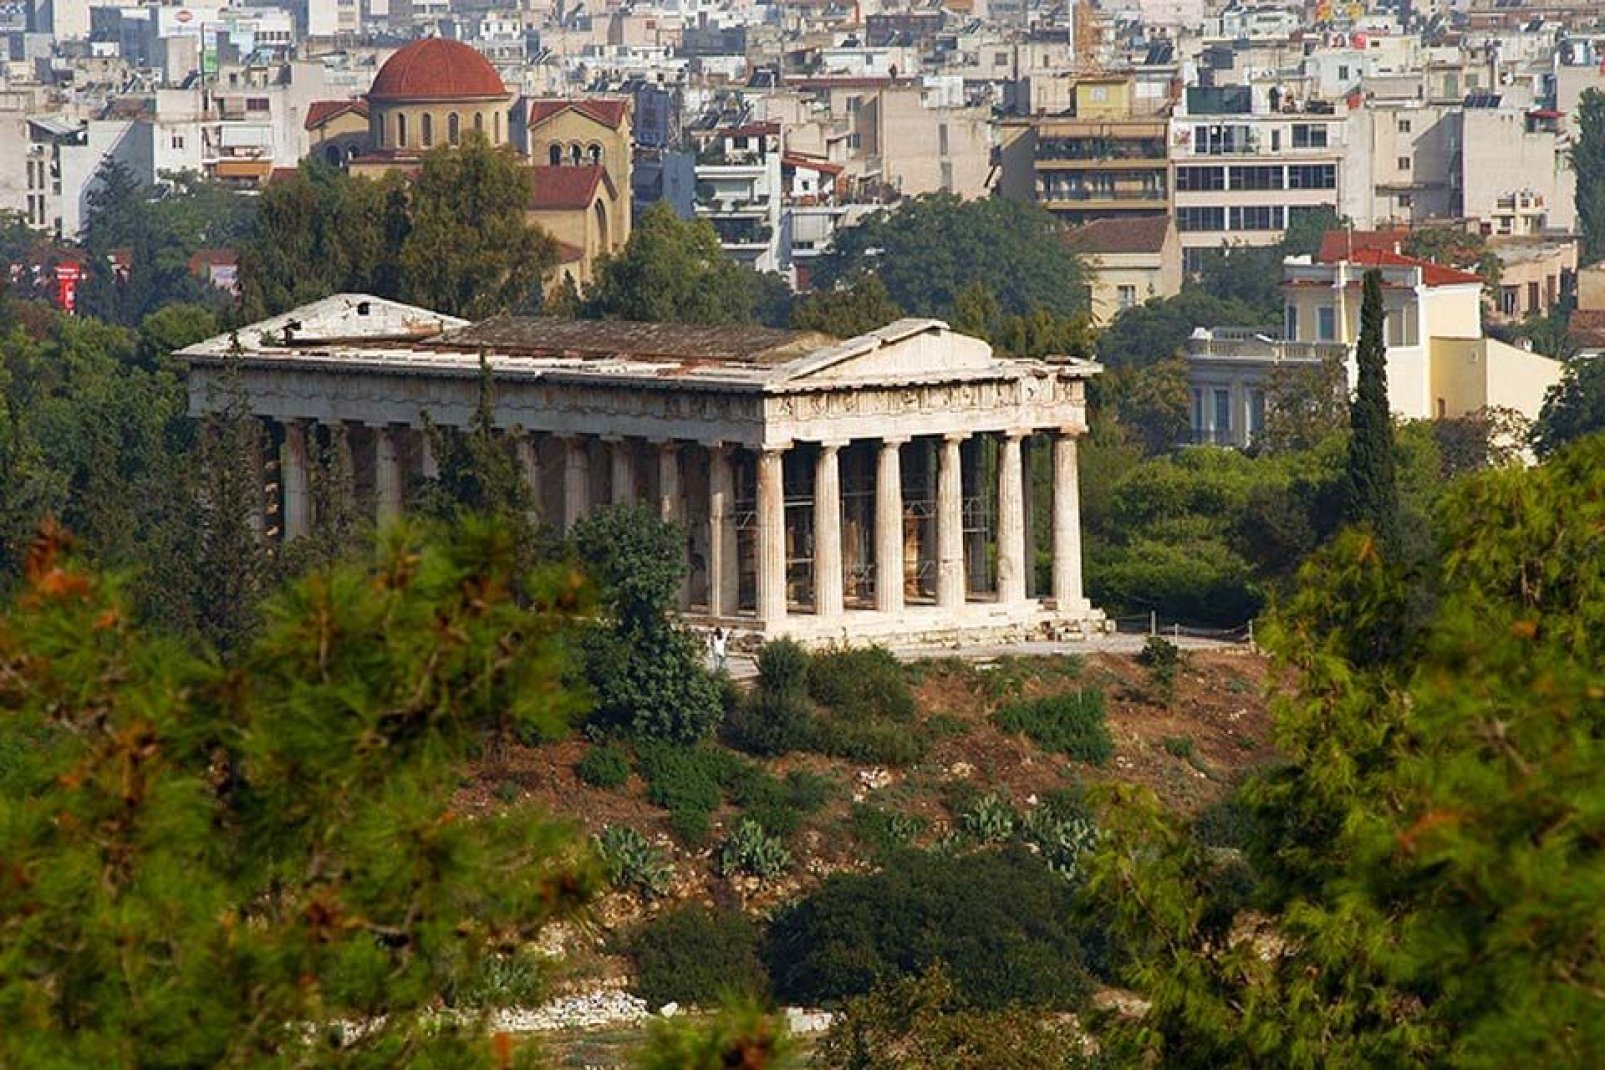 The Parthenon is a must-see stop during a visit to the capital.